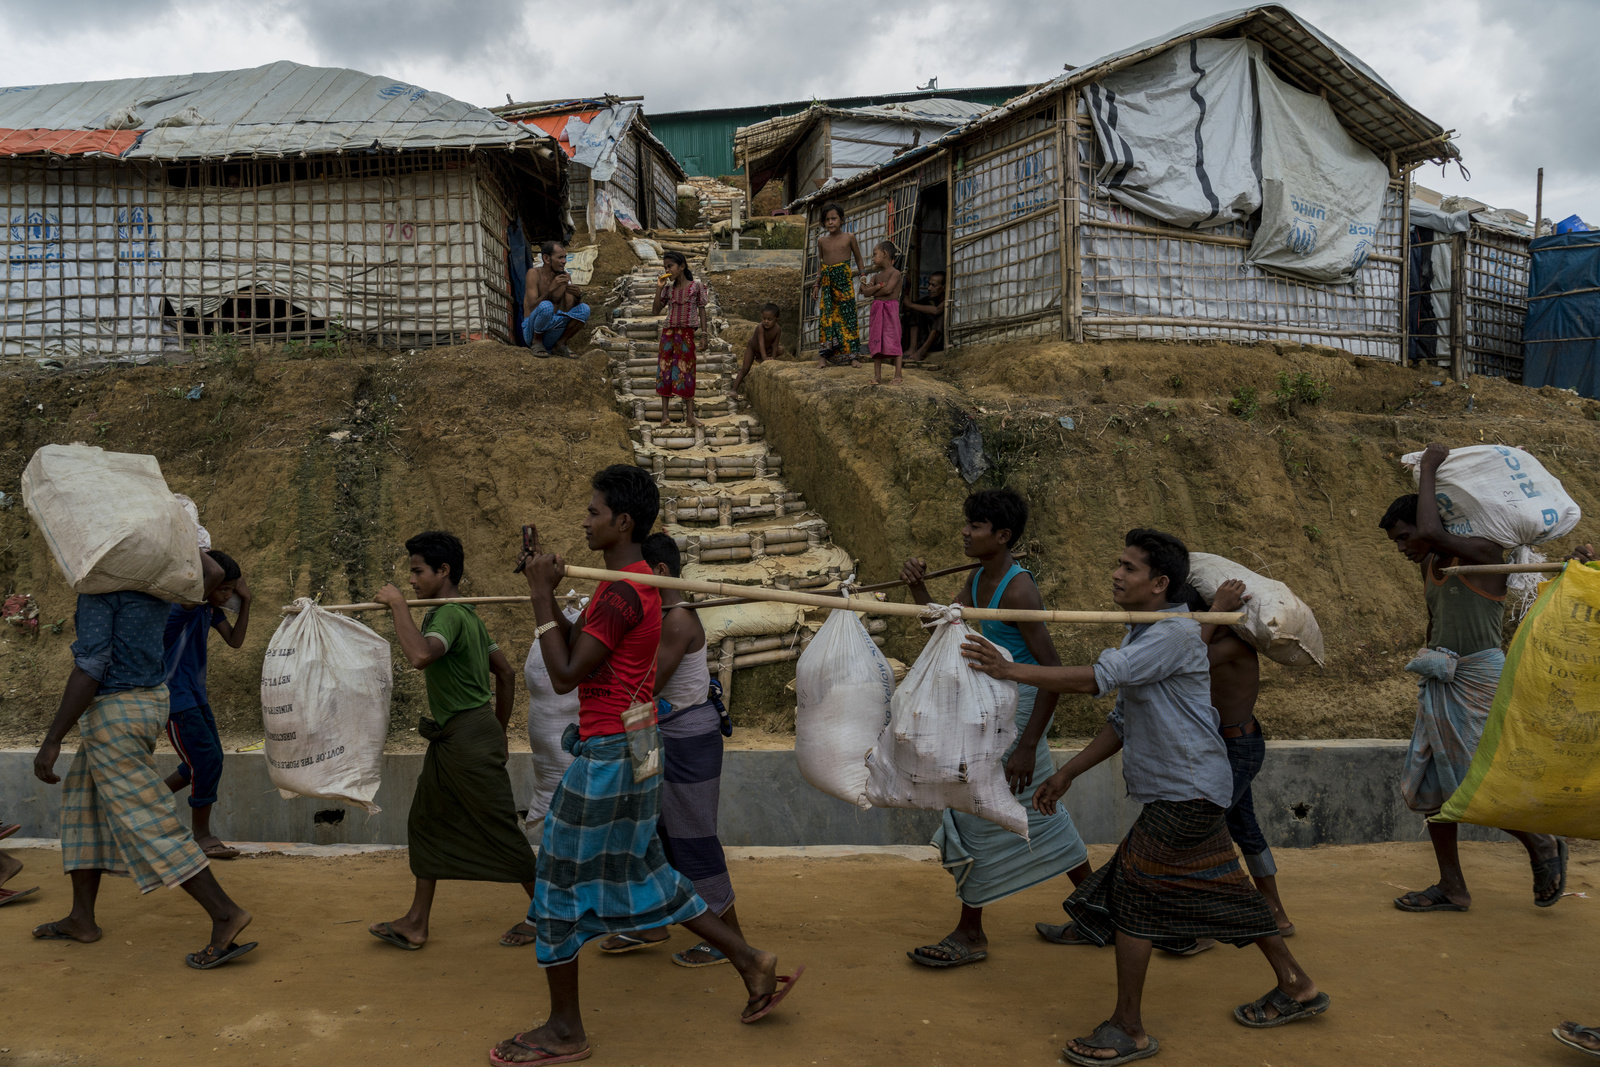 Rohingya refugees, who were living in tents at risk of landslides in Kutupalong Camp 5, carry their belongings as they are relocated to the new Camp 4 Extension, in Kutupalong refugee camp in Bangladesh on June 30th, 2018.